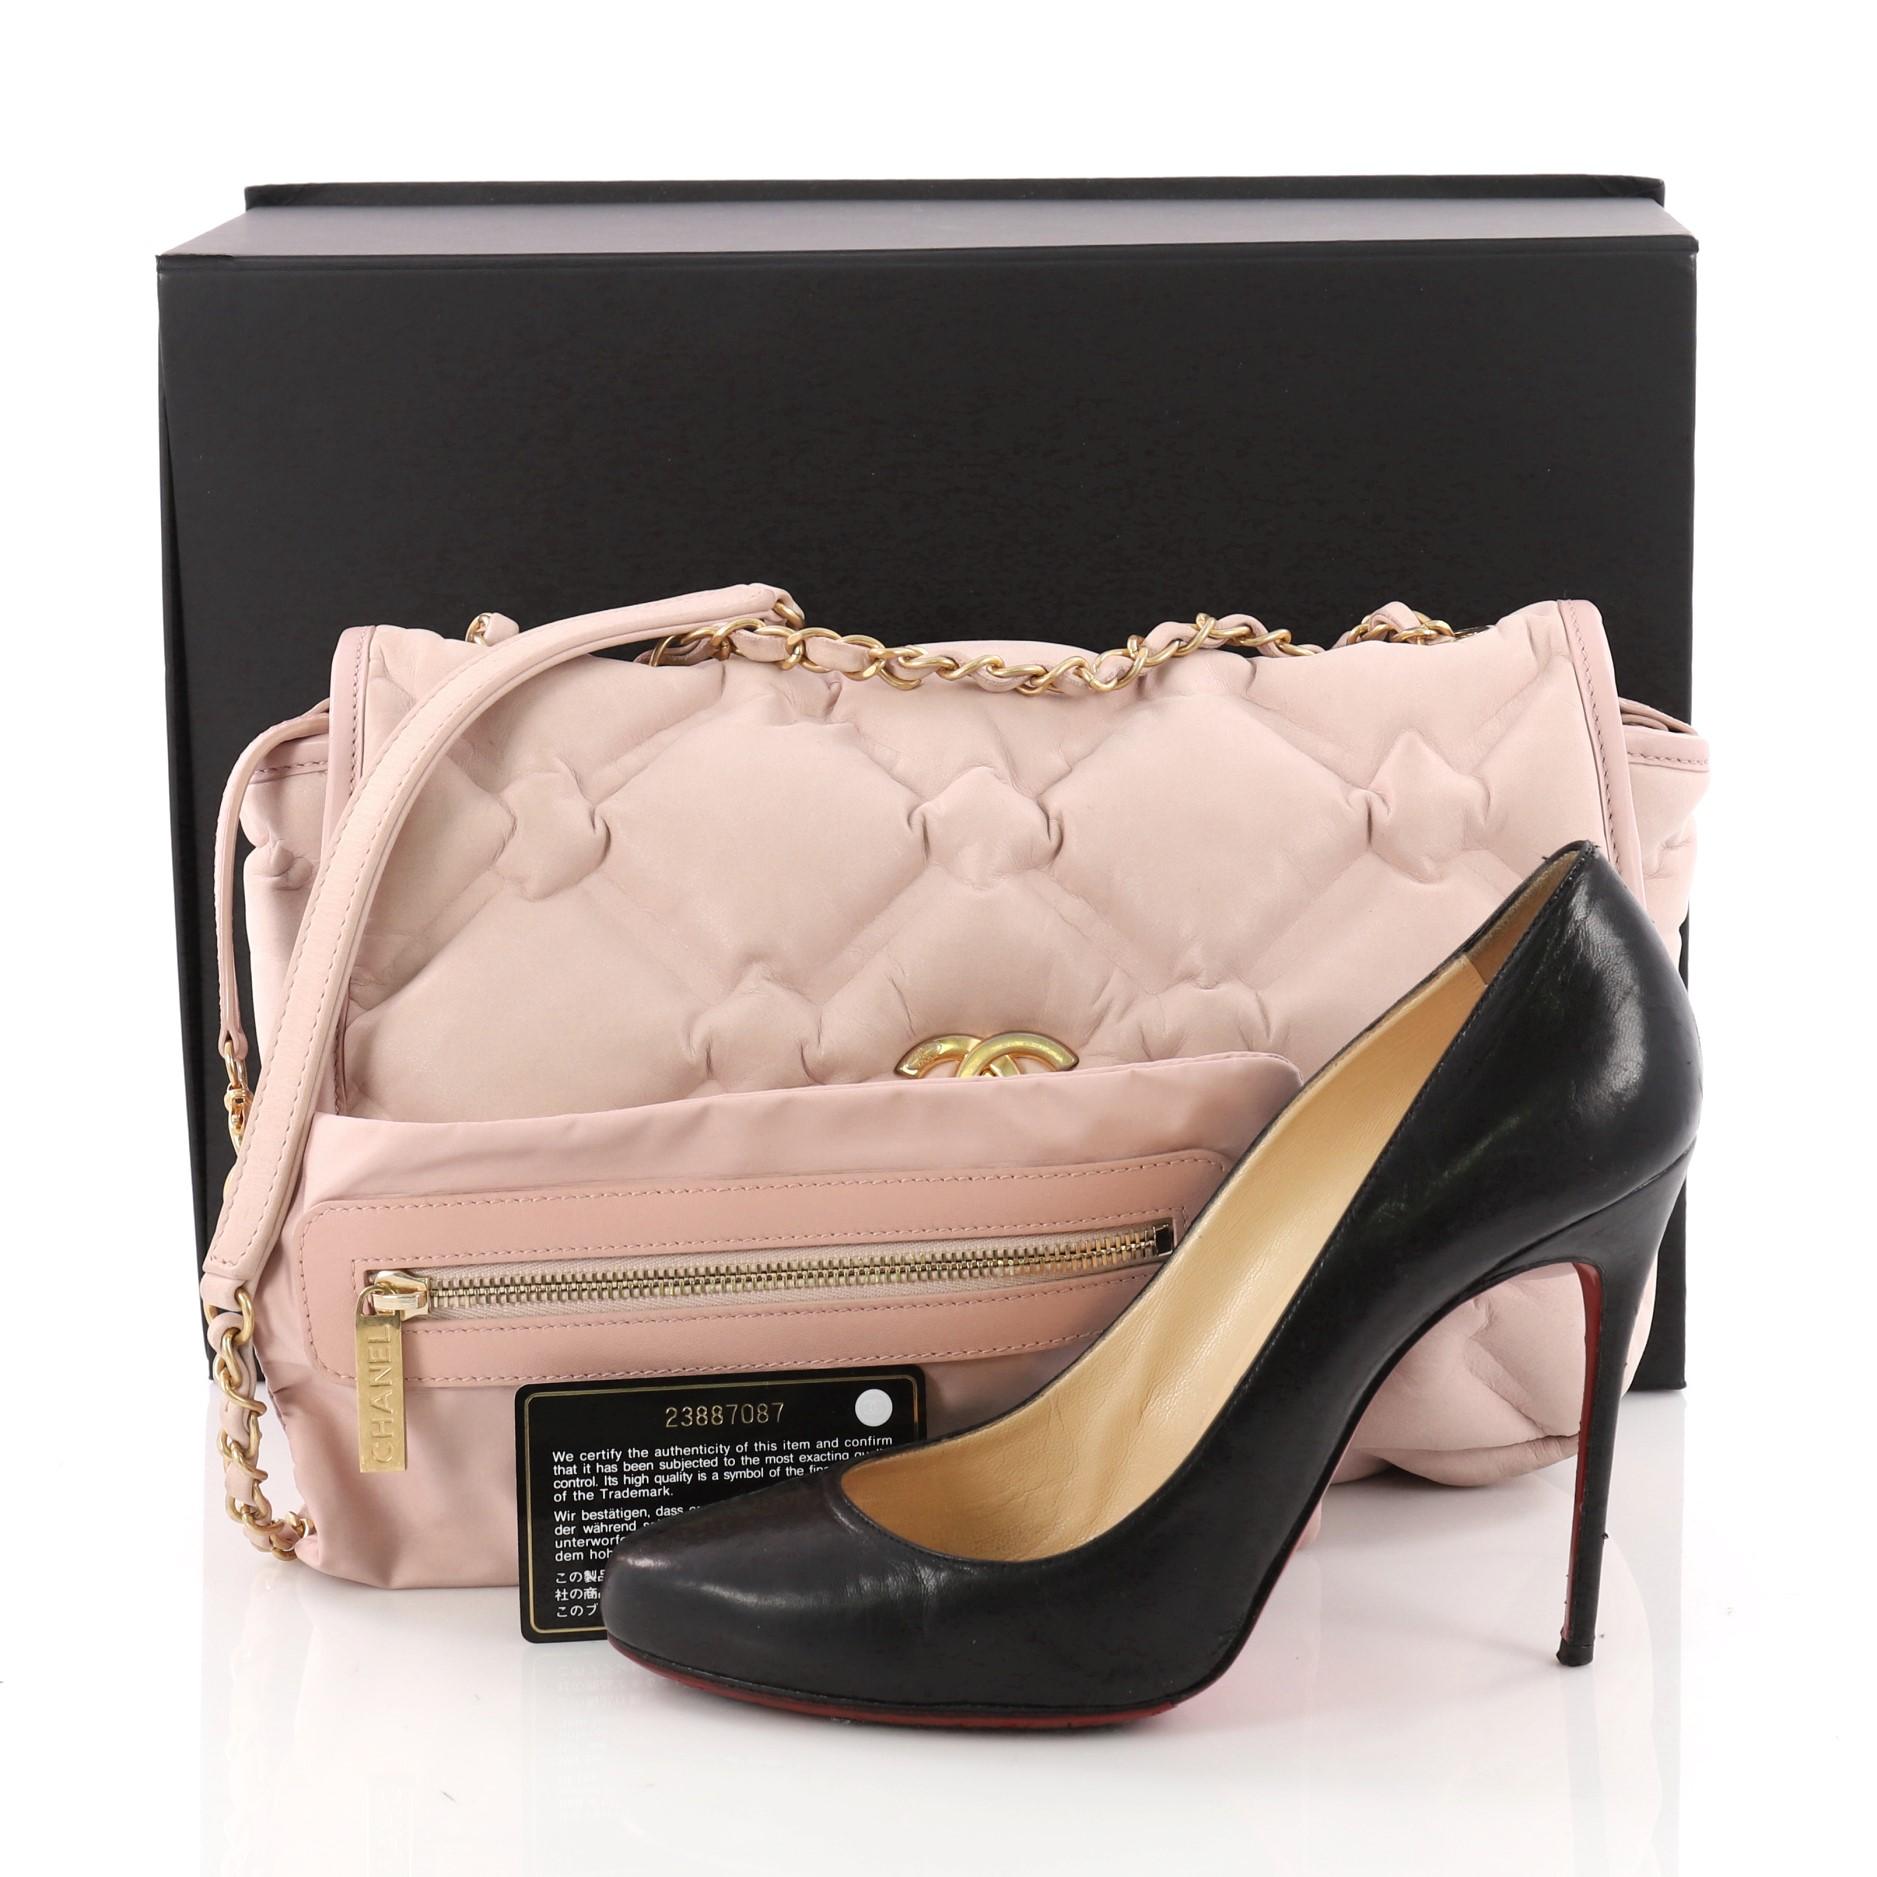 This authentic Chanel Chesterfield Flap Bag Quilted Calfskin Jumbo is a chic and stylish bag perfect for the modern fashionista. Crafted from light pink calfskin leather in chesterfield-style quilting, this flap bag features dual woven-in leather